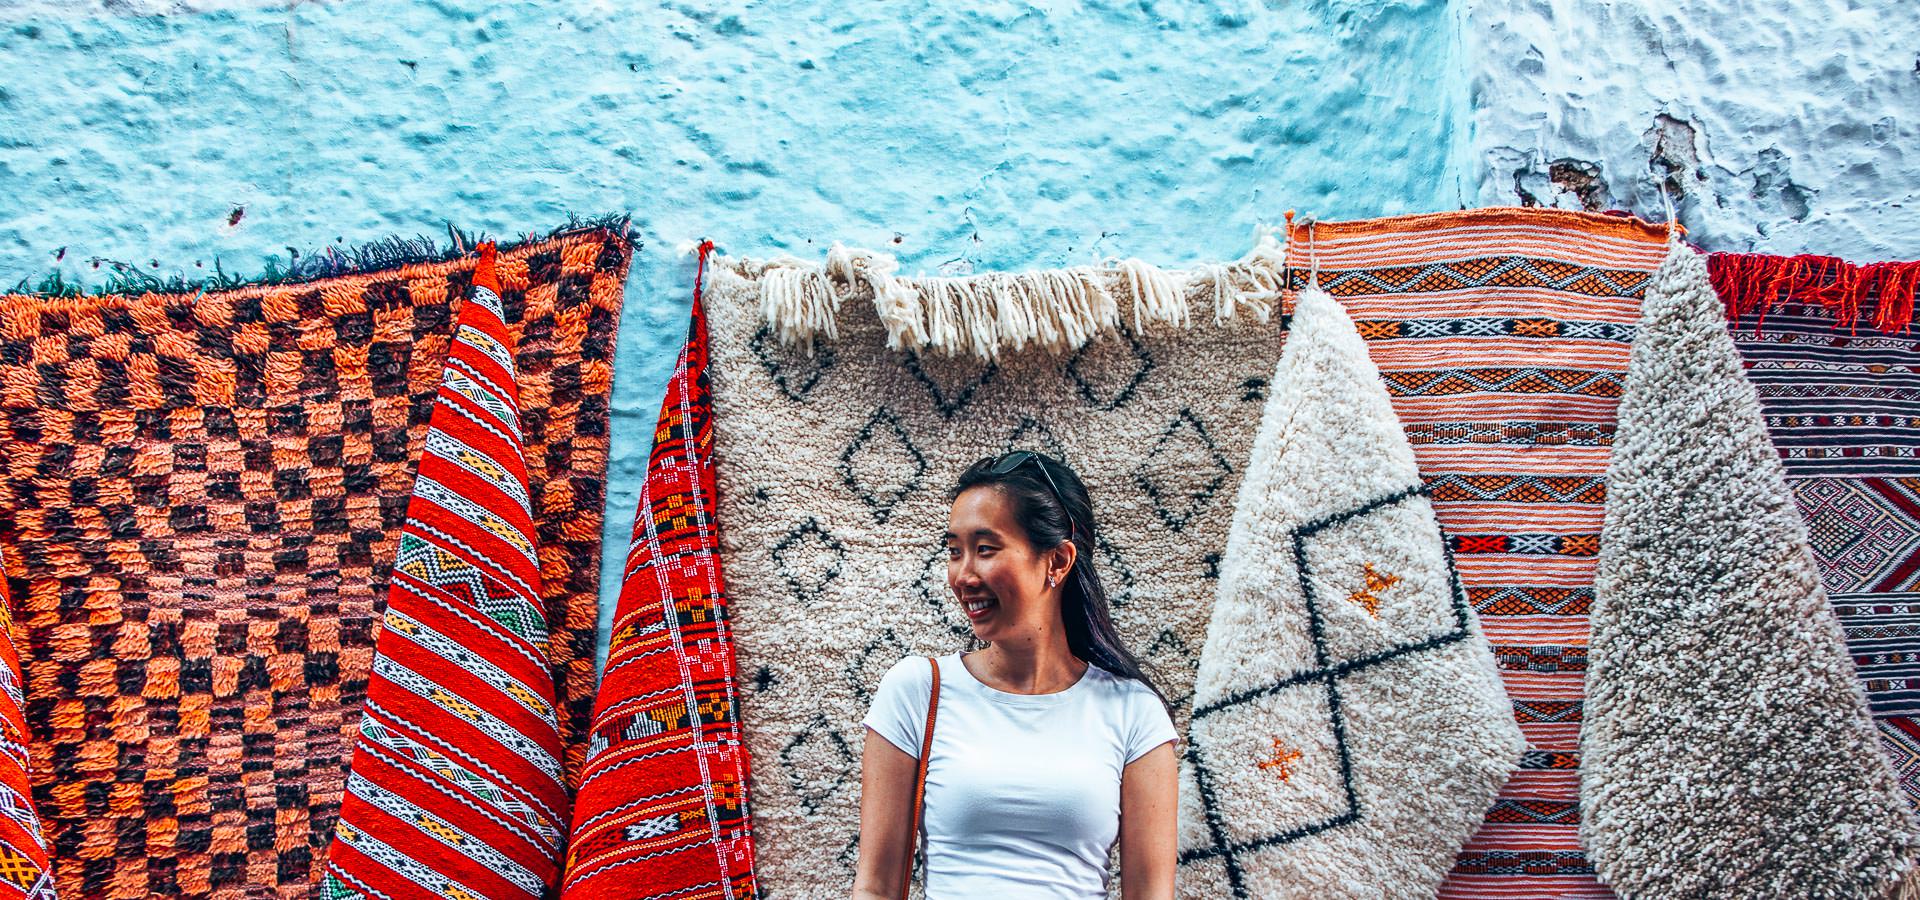 Morocco Travel Photography: 35 Photos To Inspire You To Visit | visit the philippines 7